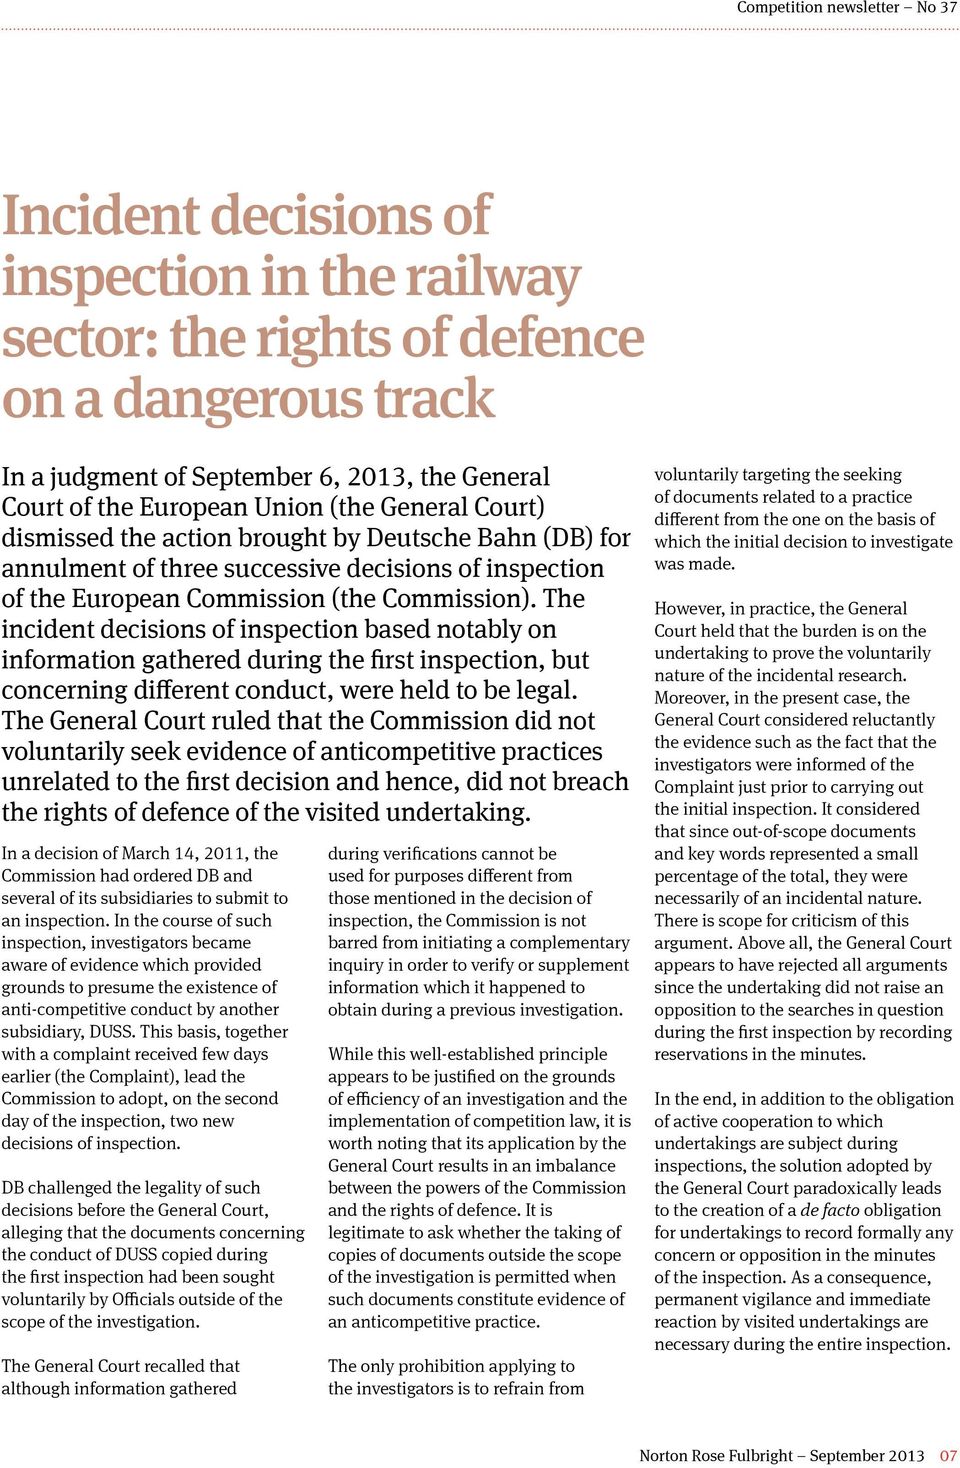 The incident decisions of inspection based notably on information gathered during the first inspection, but concerning different conduct, were held to be legal.